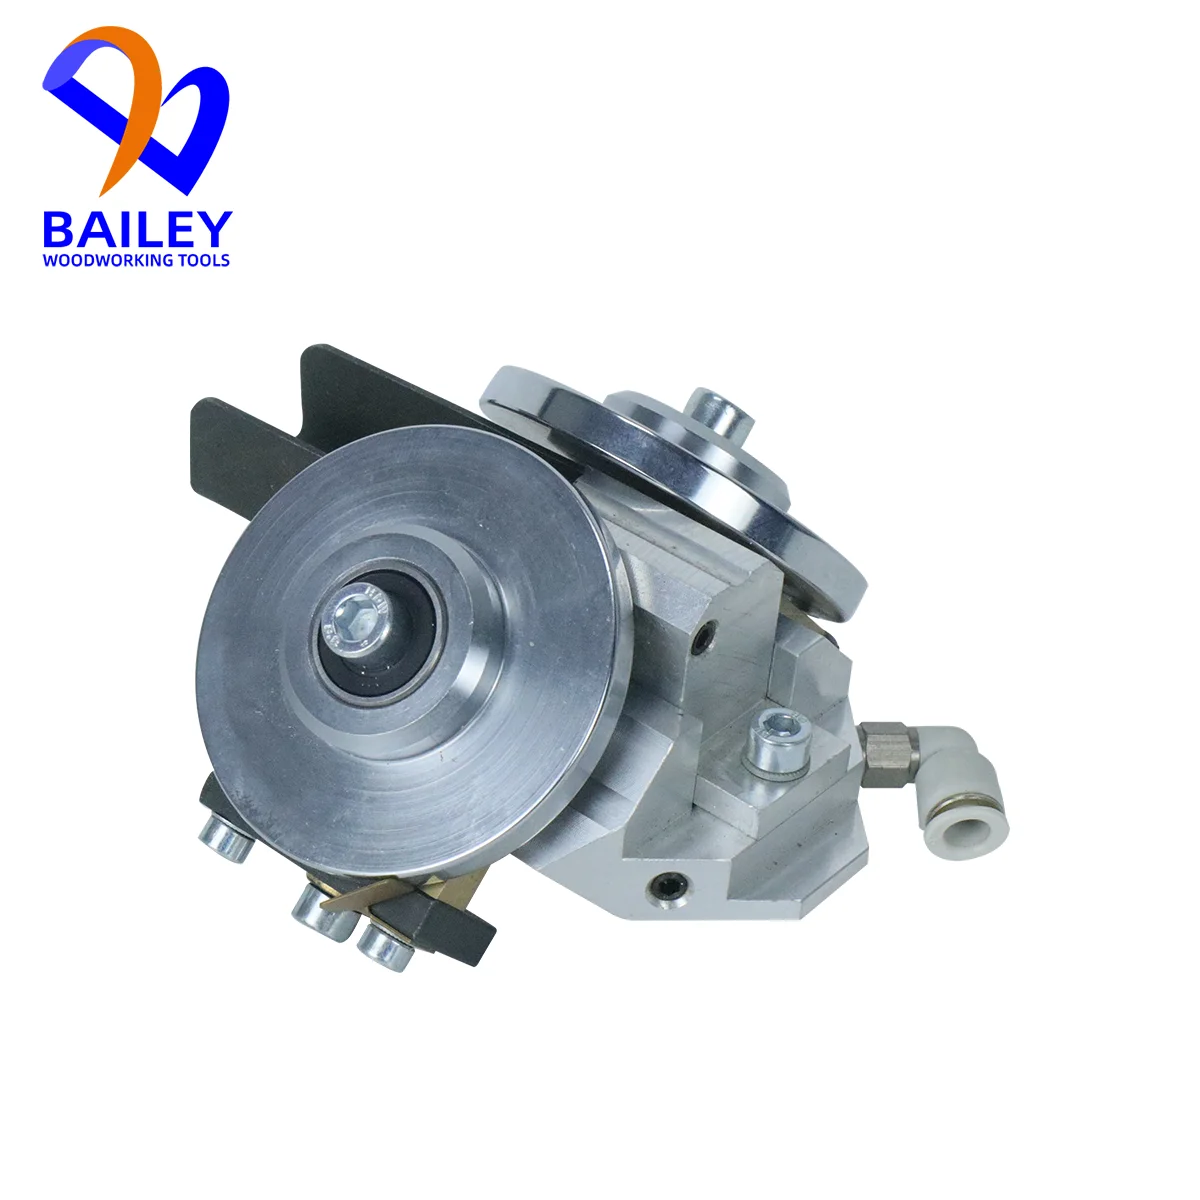 BAILEY 1set 2-012-80-3350 2-012-80-3360 CHANGING HEAD PN10 Replaceable Knife Head of the Radius Cycle PN10 for Homag Machine